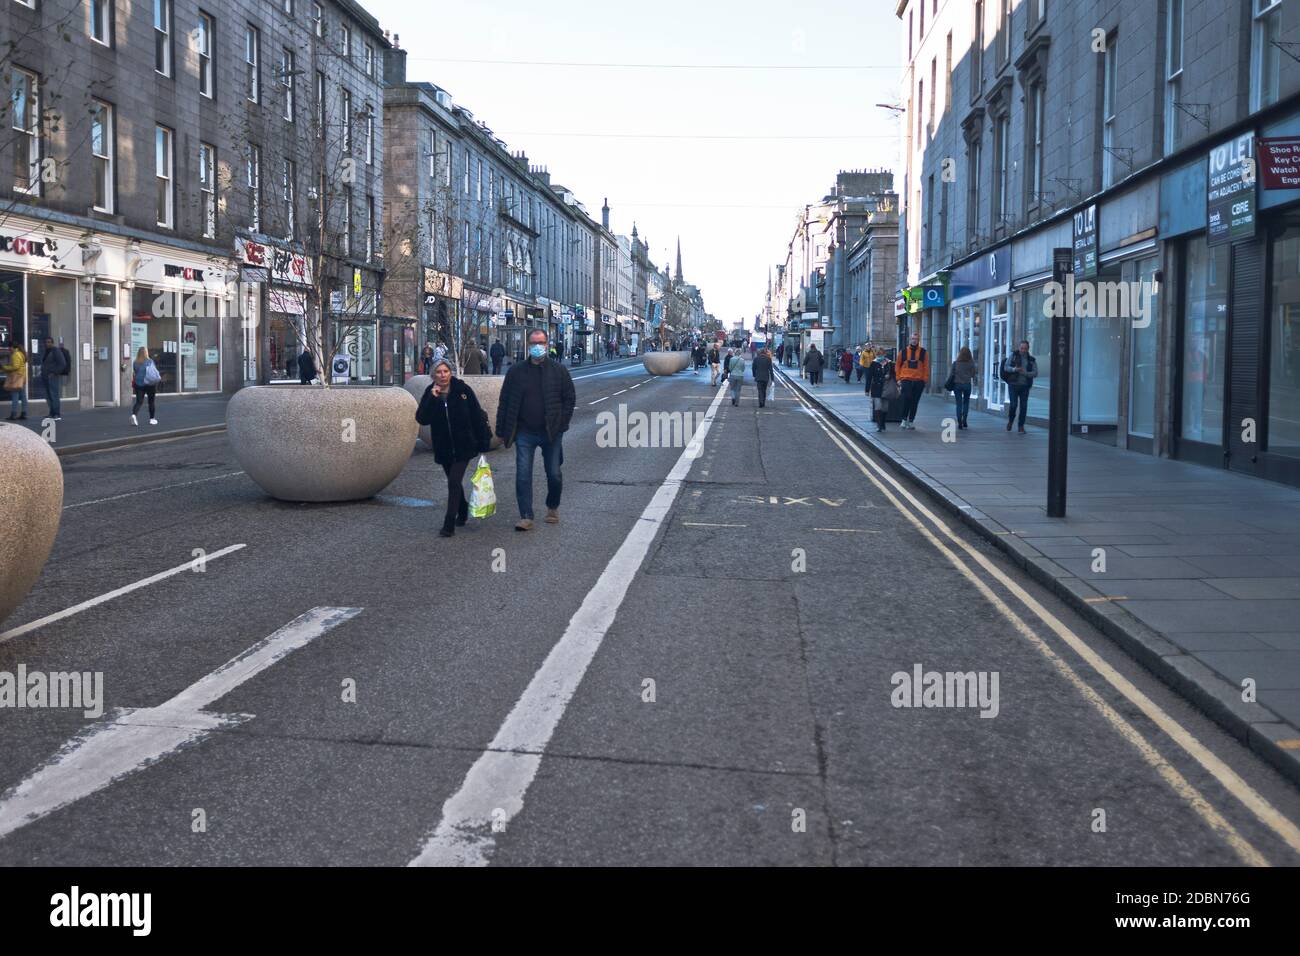 dh  COVID 19 UK Aberdeen Union Street pedestrain road metre distancing mask people with face masks scotland Stock Photo